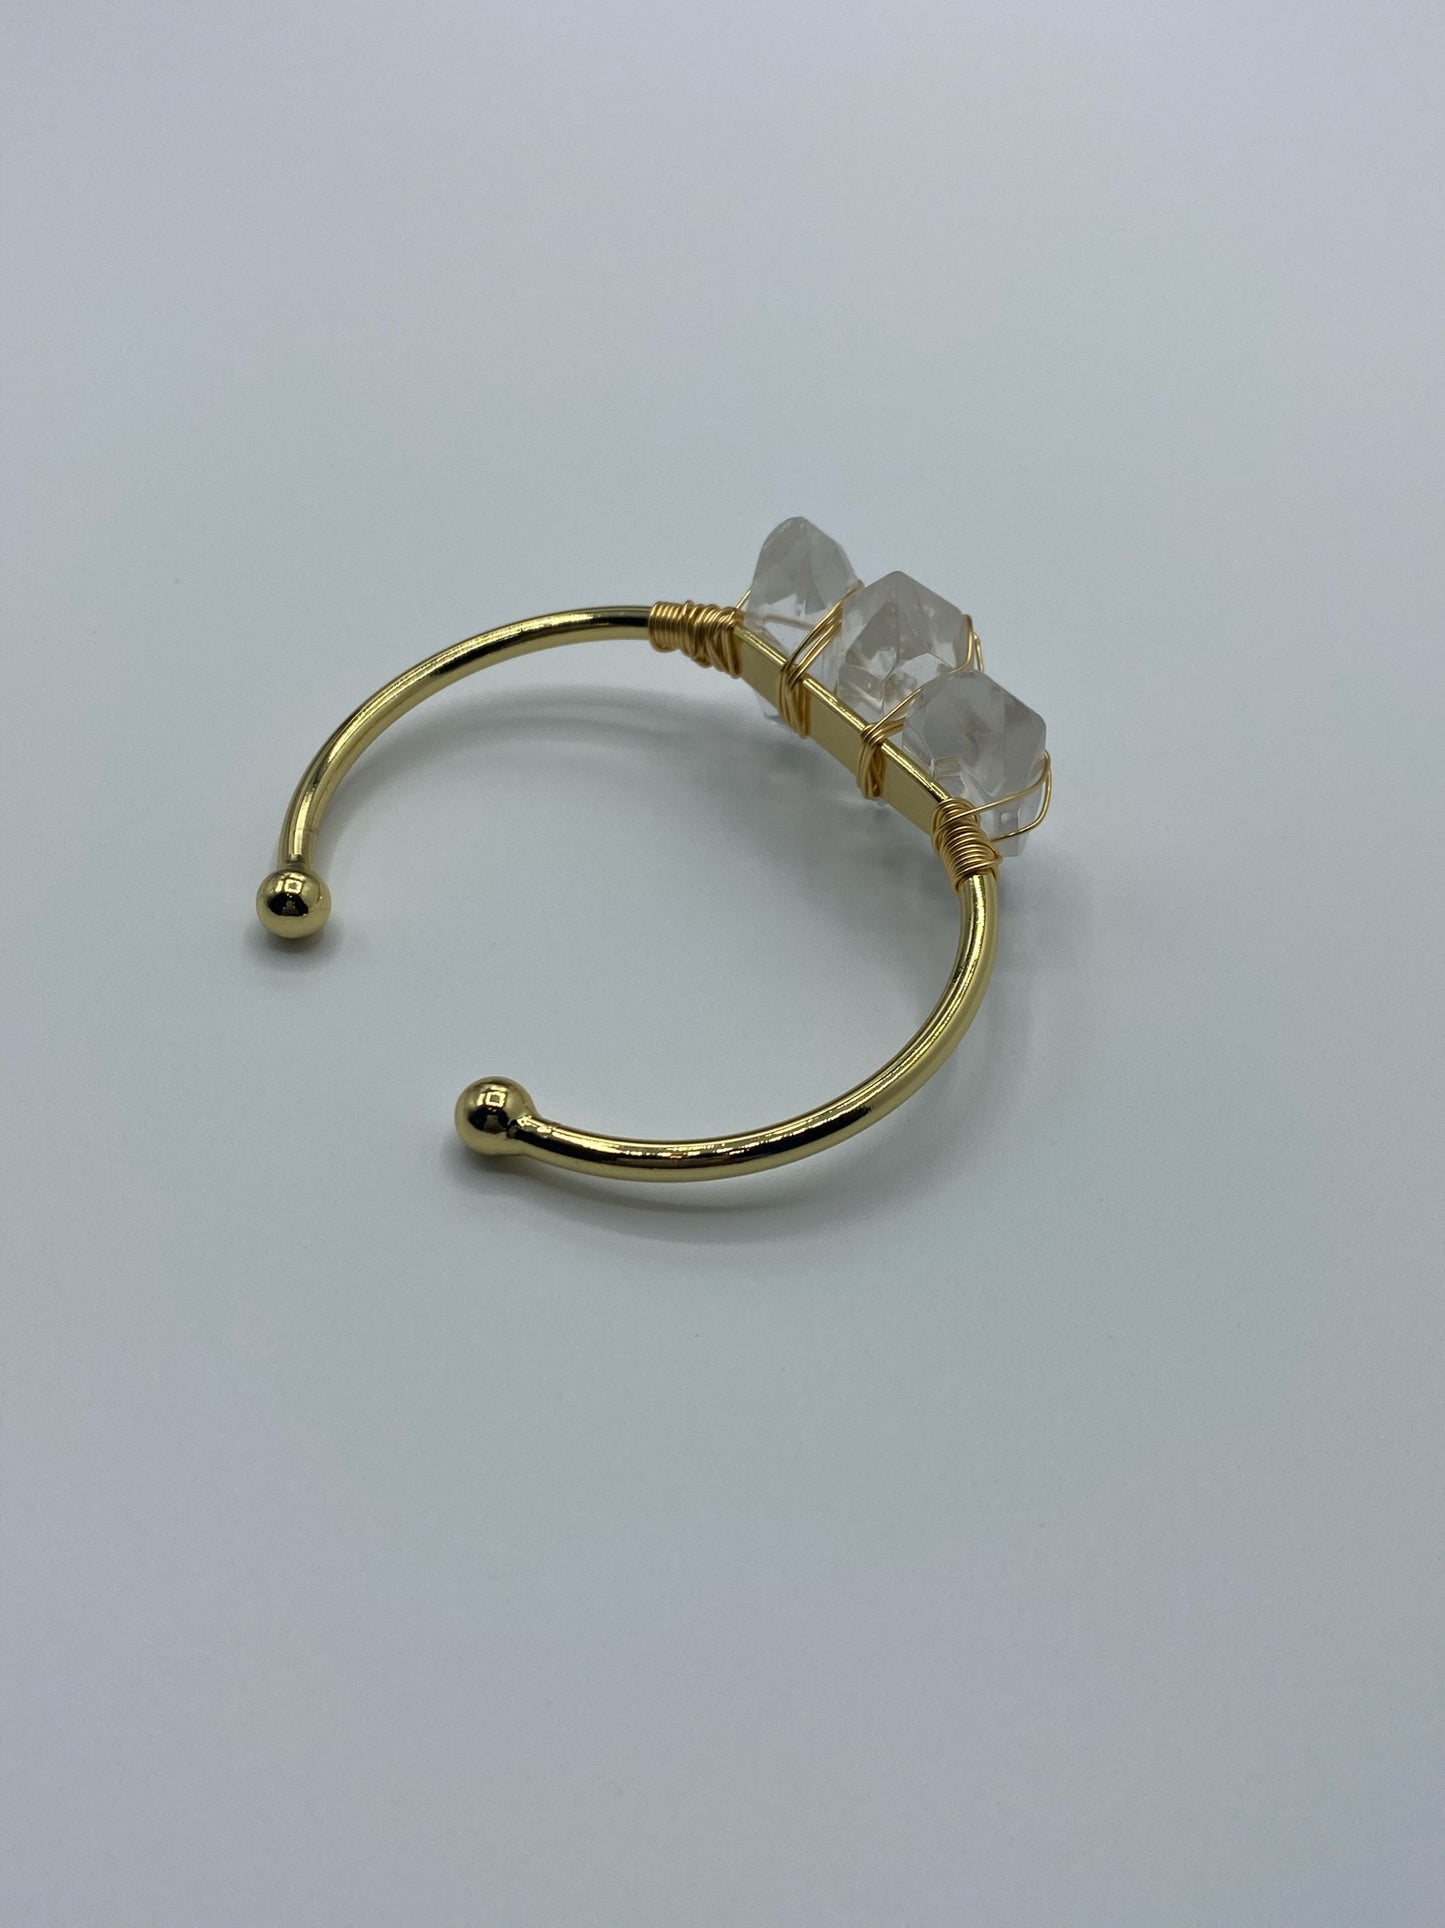 Three small to medium clear quartz crystals on a 18K gold plated bangle.